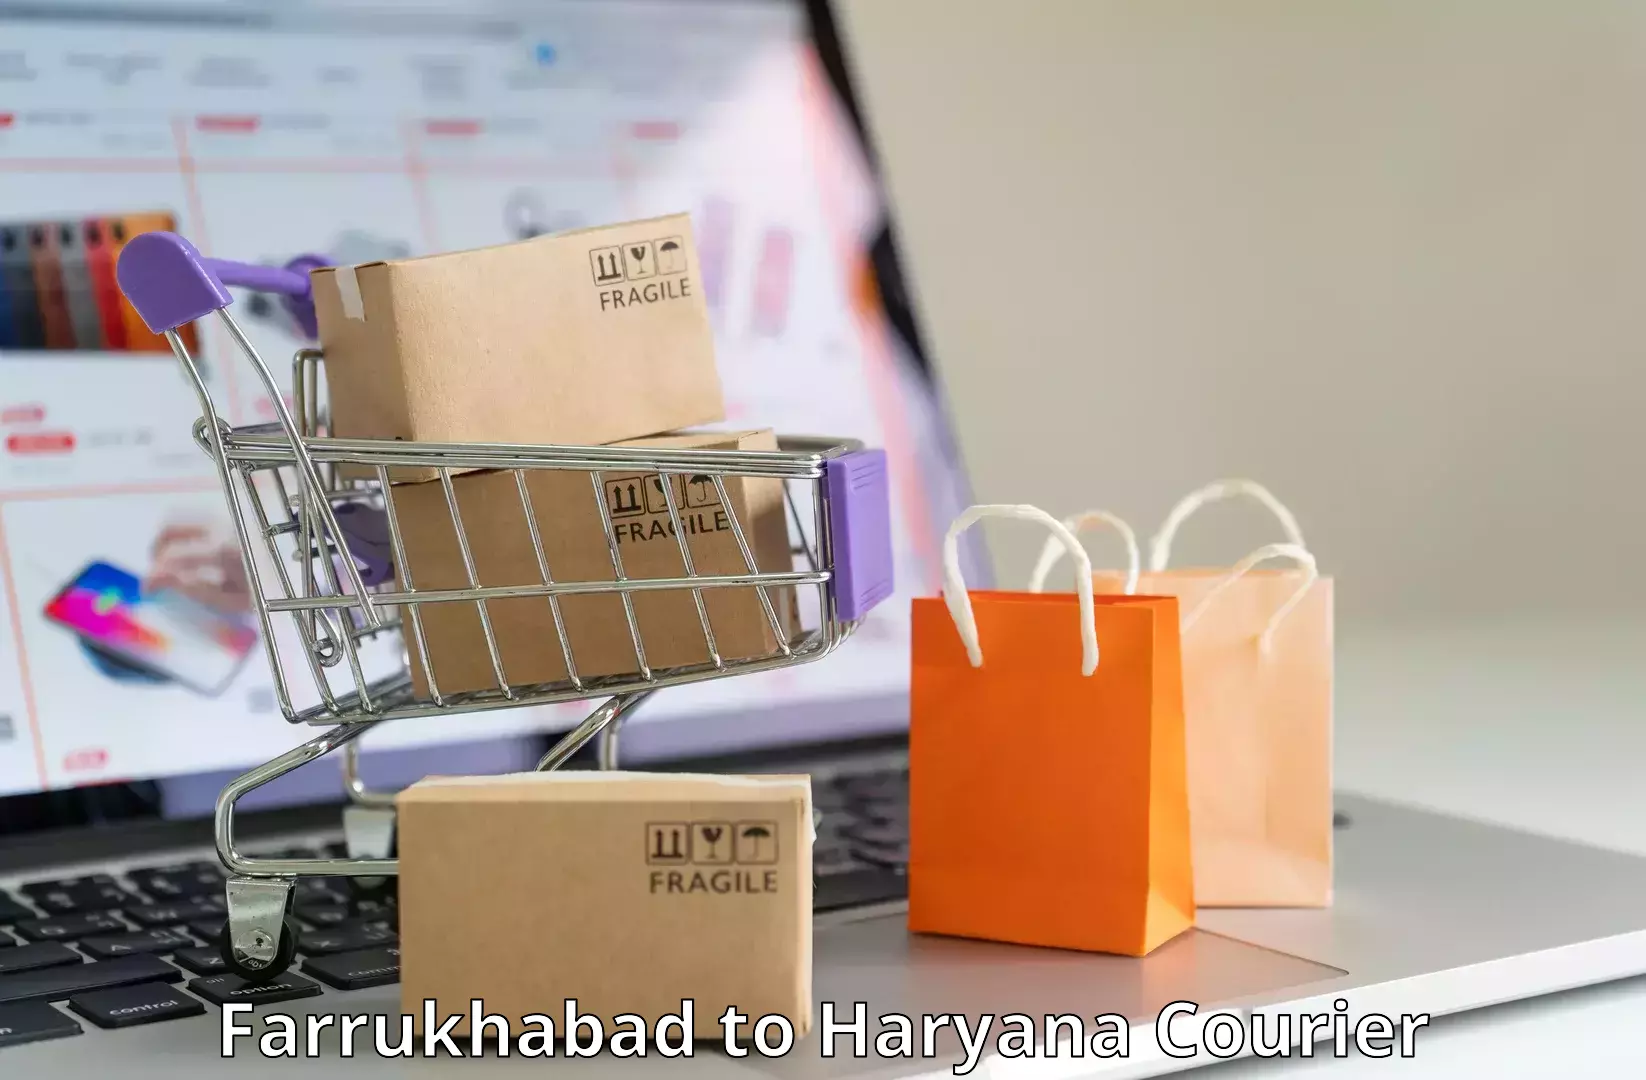 Courier service comparison Farrukhabad to Kalanwali